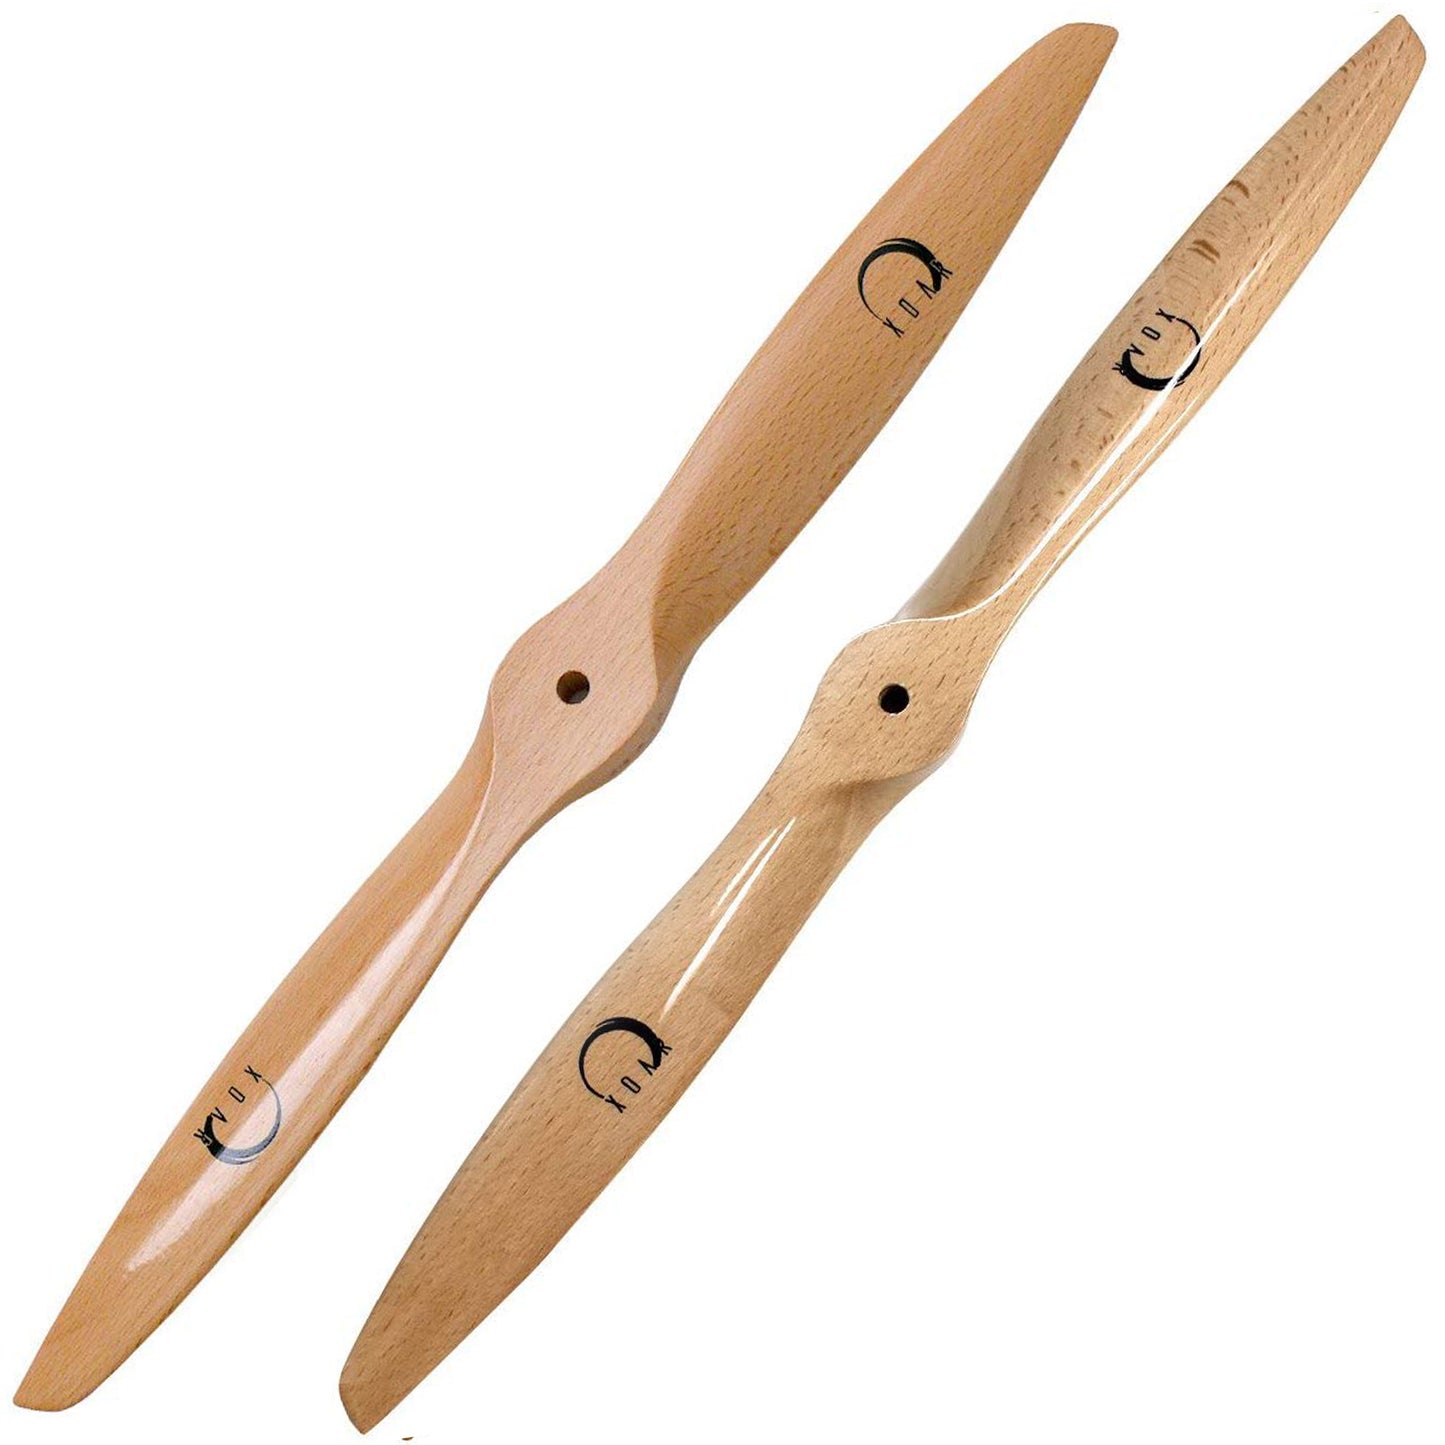 PJP-A Beechwood Precision Pair for Drones & Multicopters